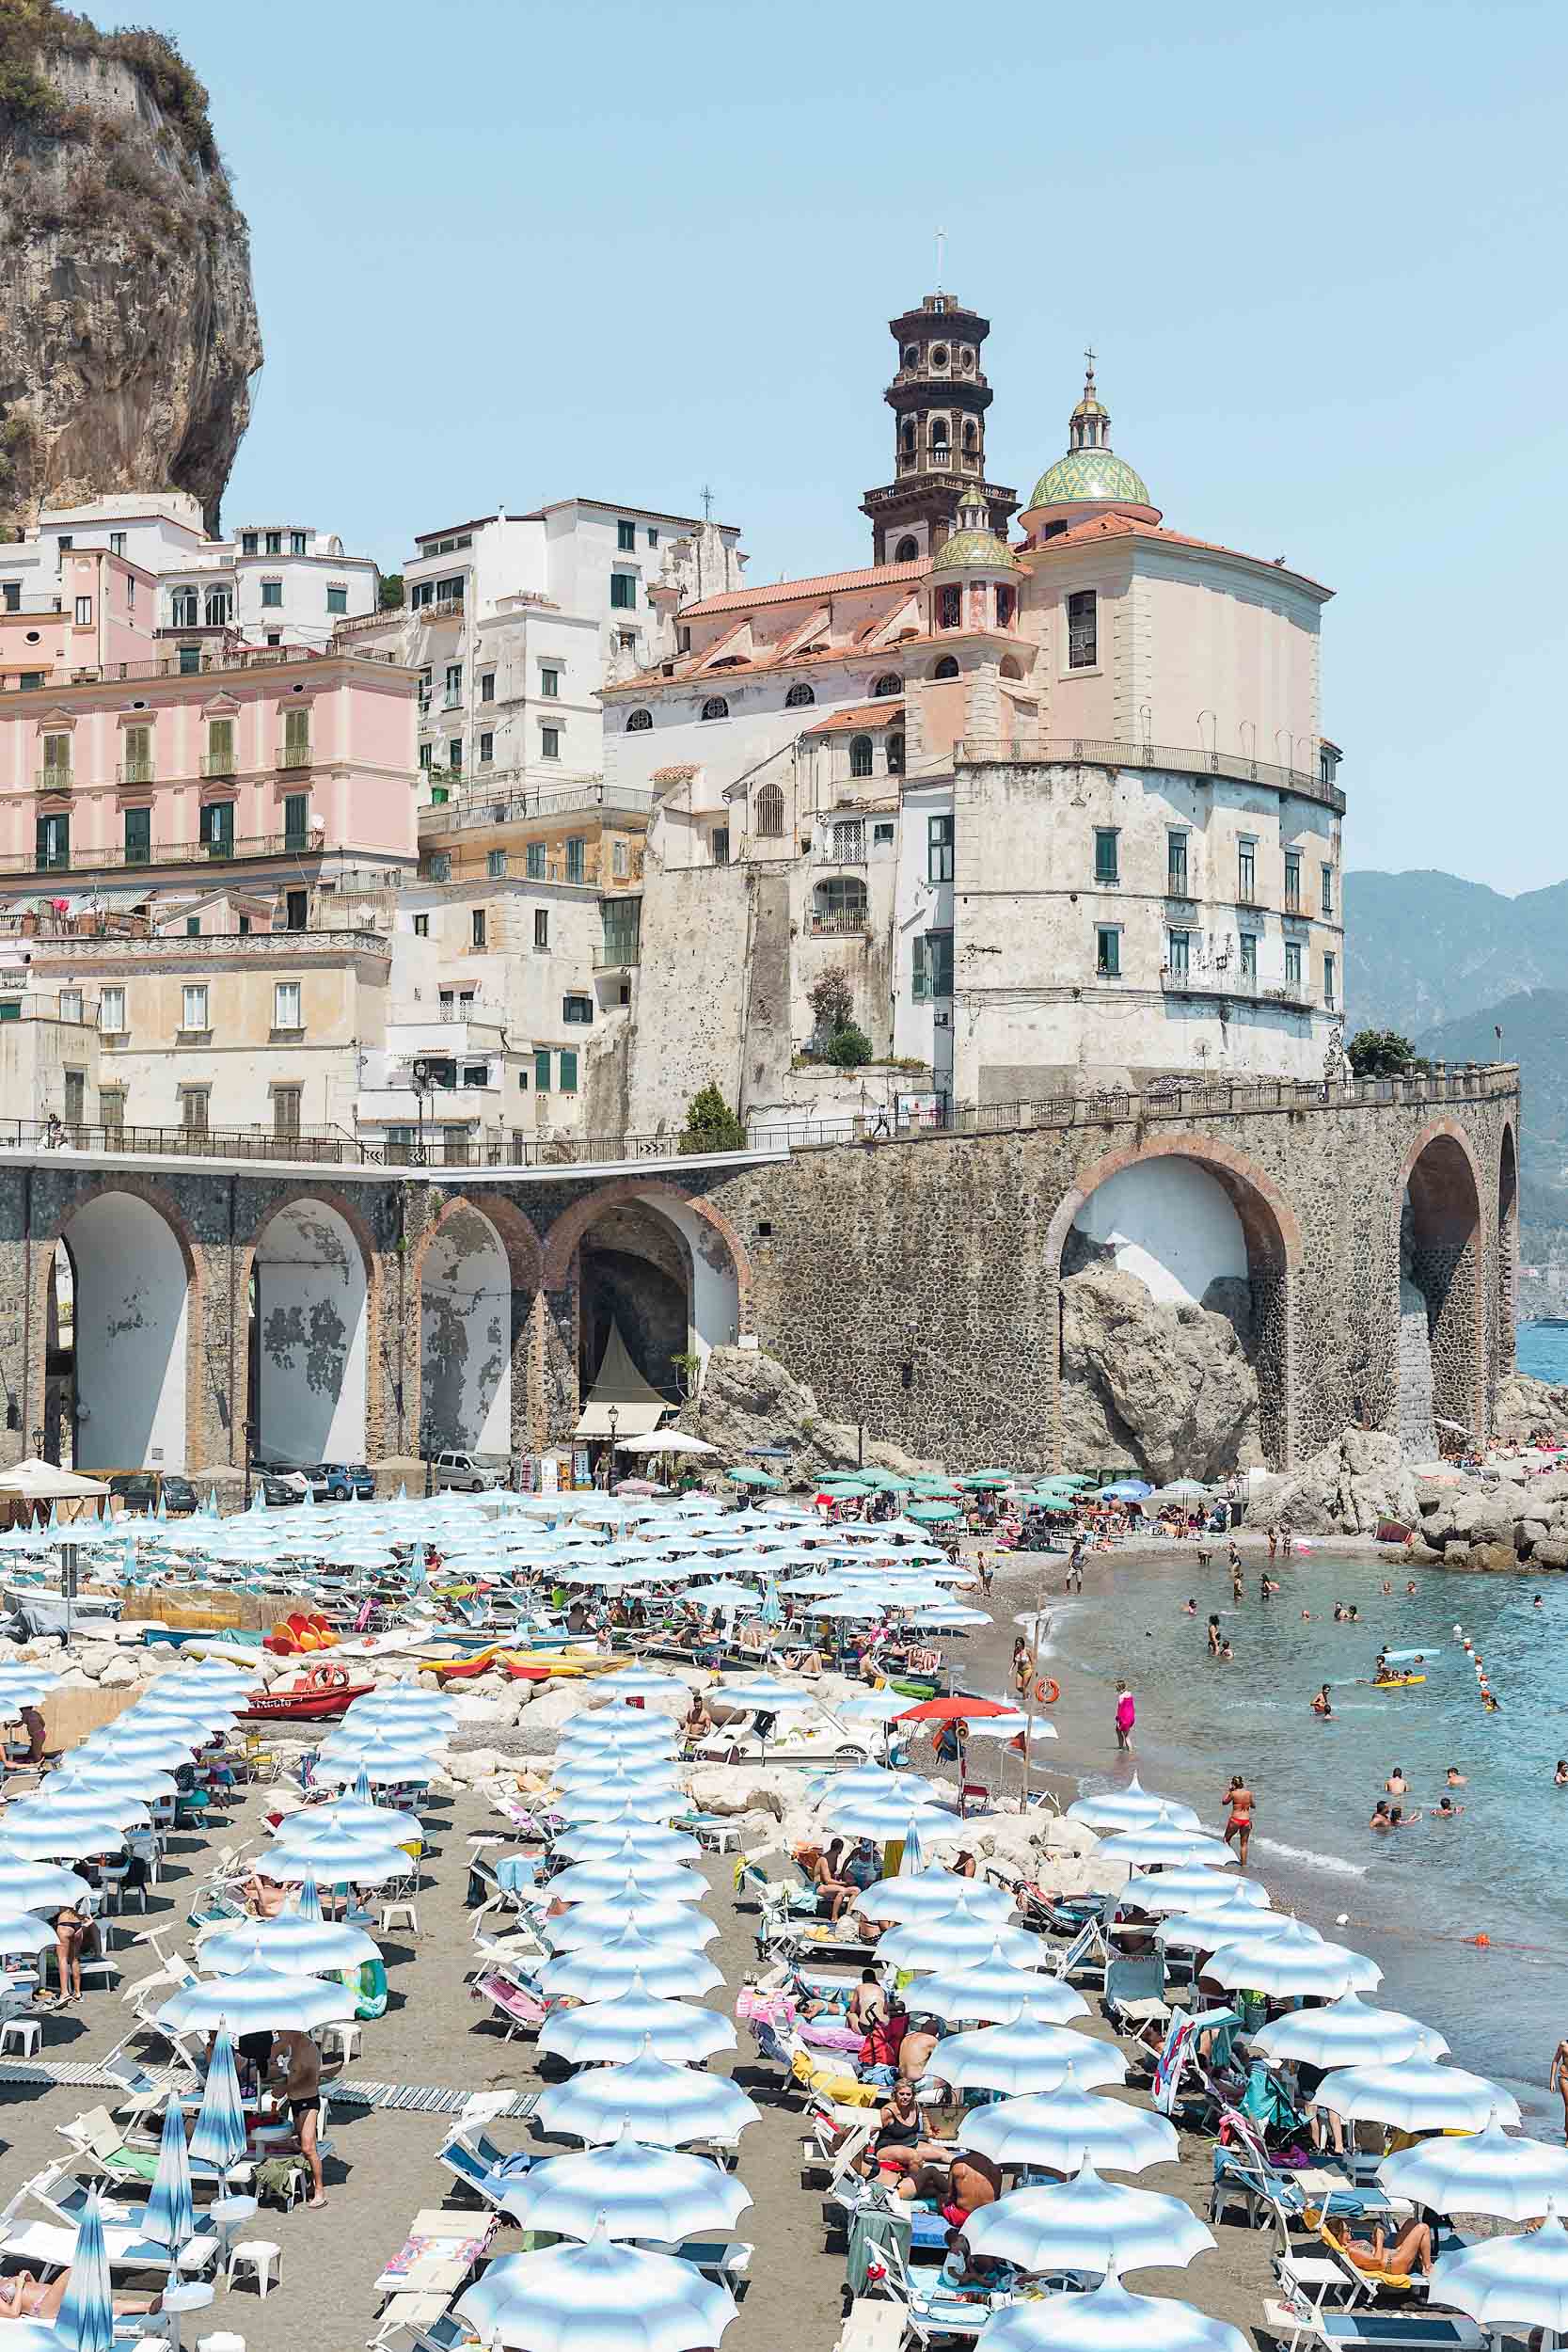 Atrani, the smallest town in Italy